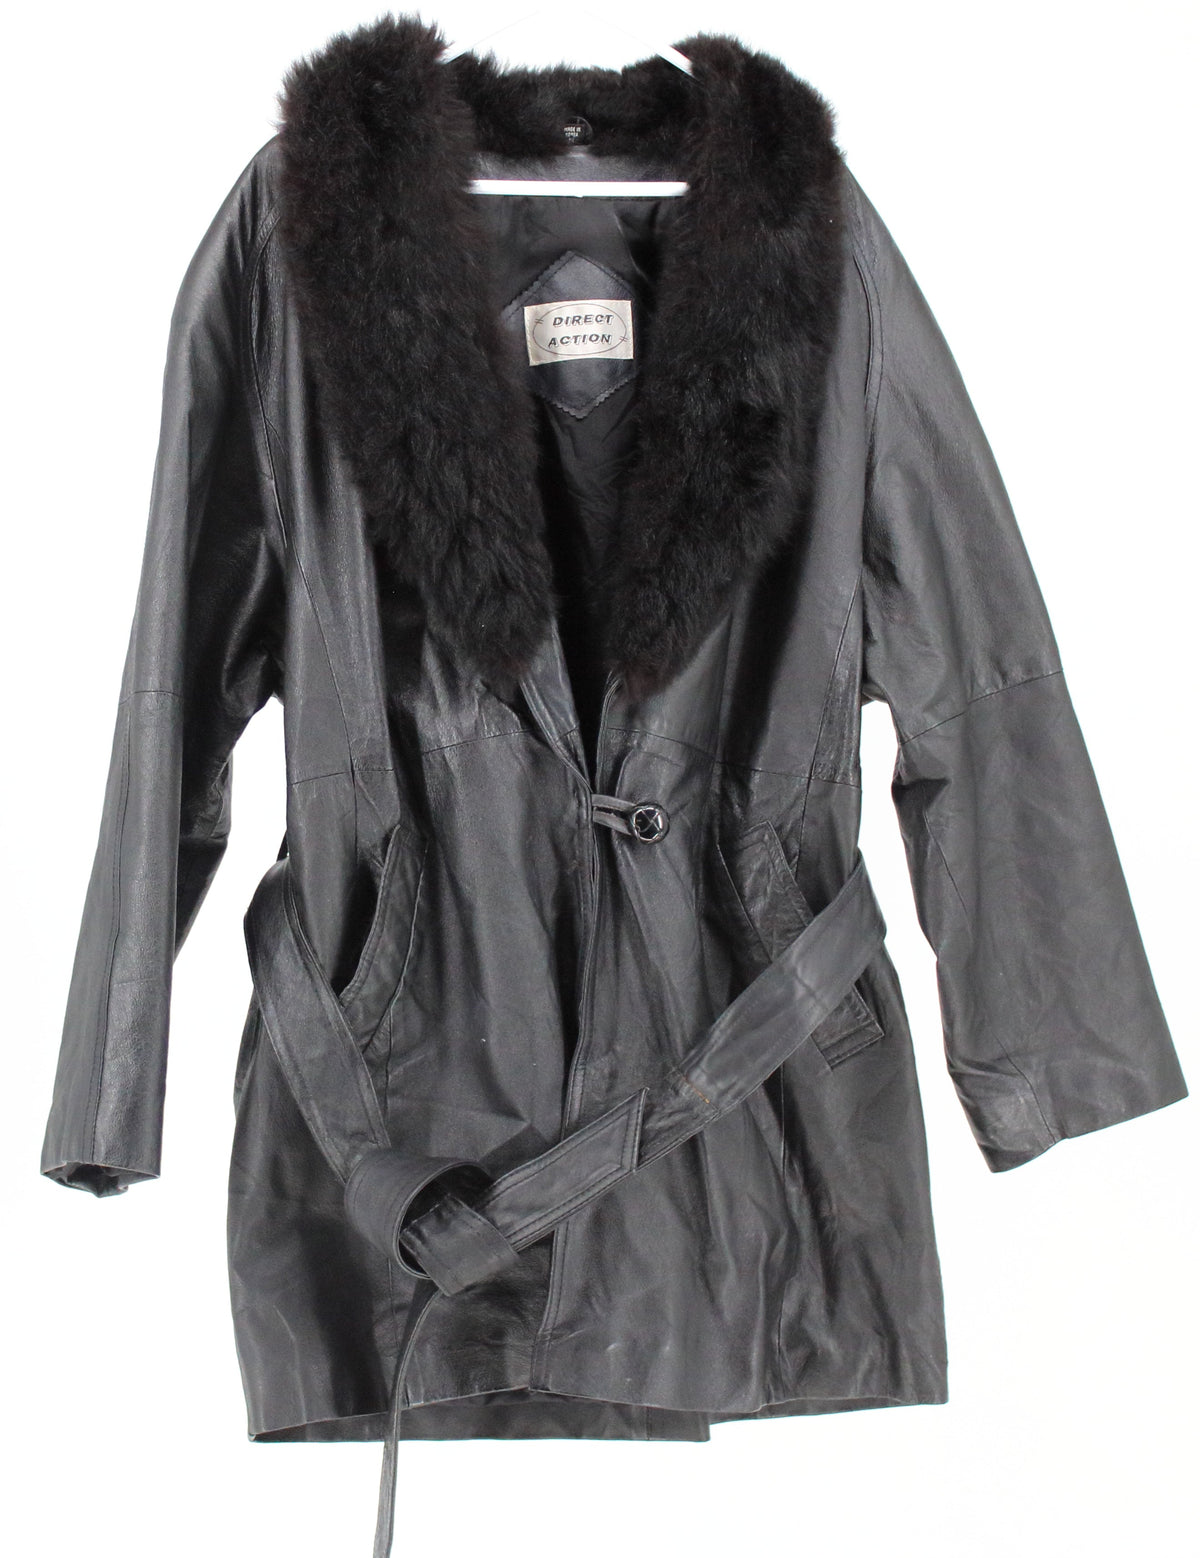 Direct Action Black Women's Leather Coat With Faux Fur Collar